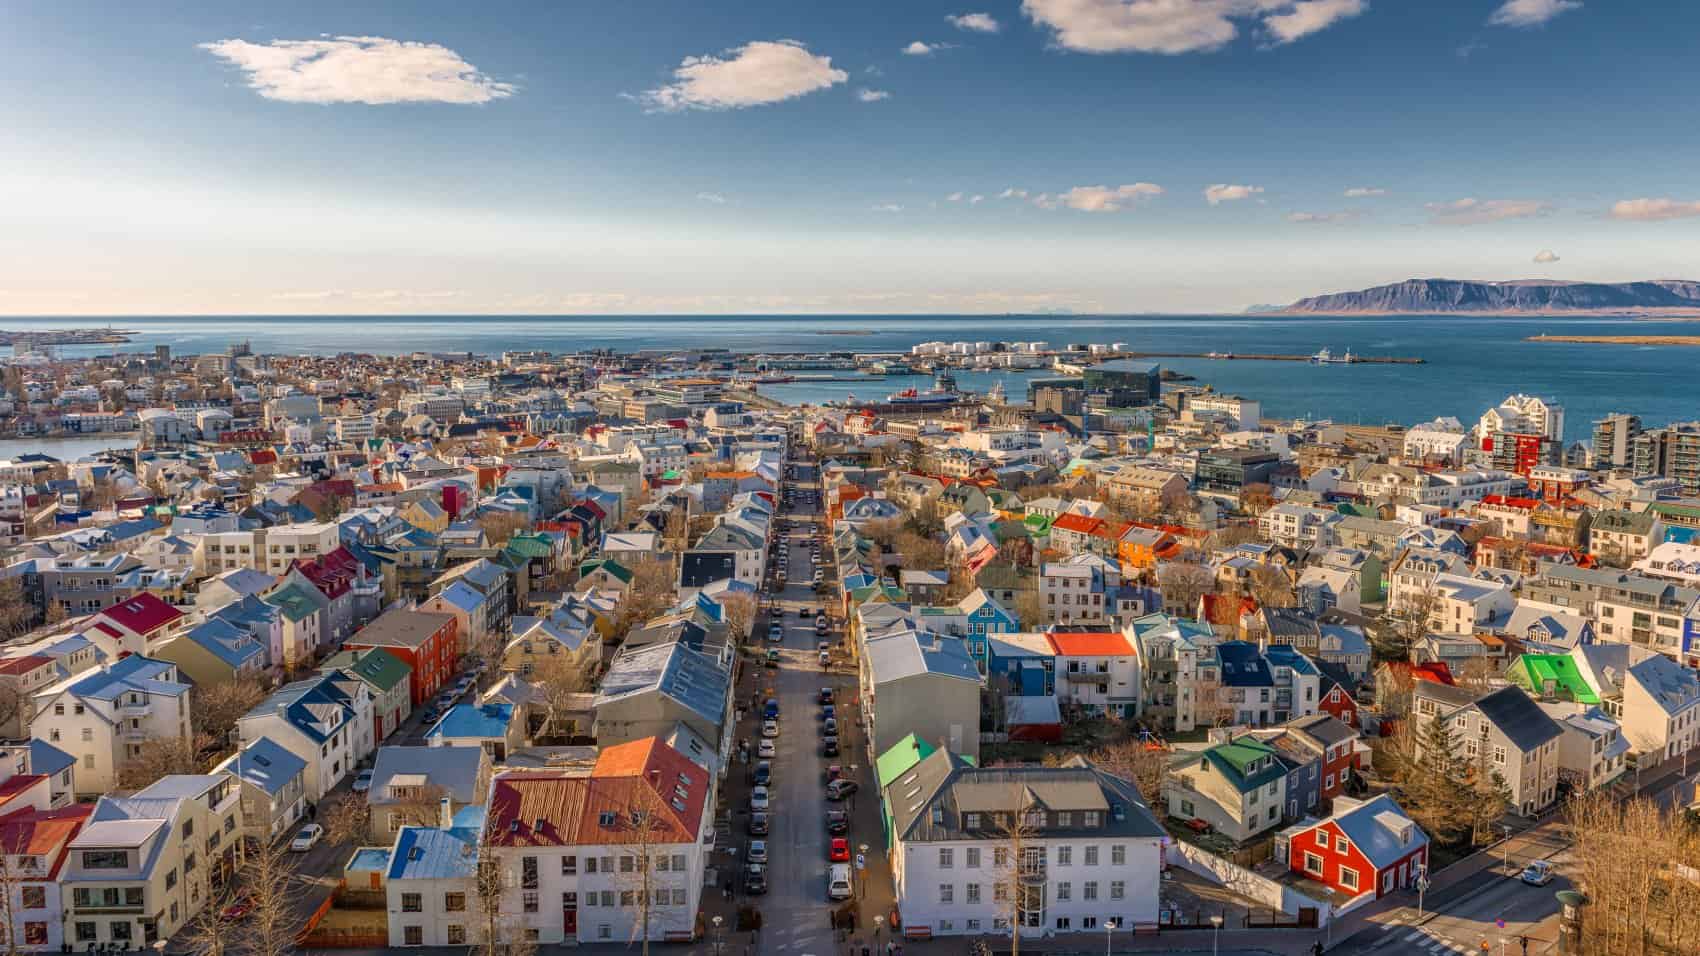 Hotels In Reykjavik: Top 5 Hotels In Reykjavik – The Best Of The Best!